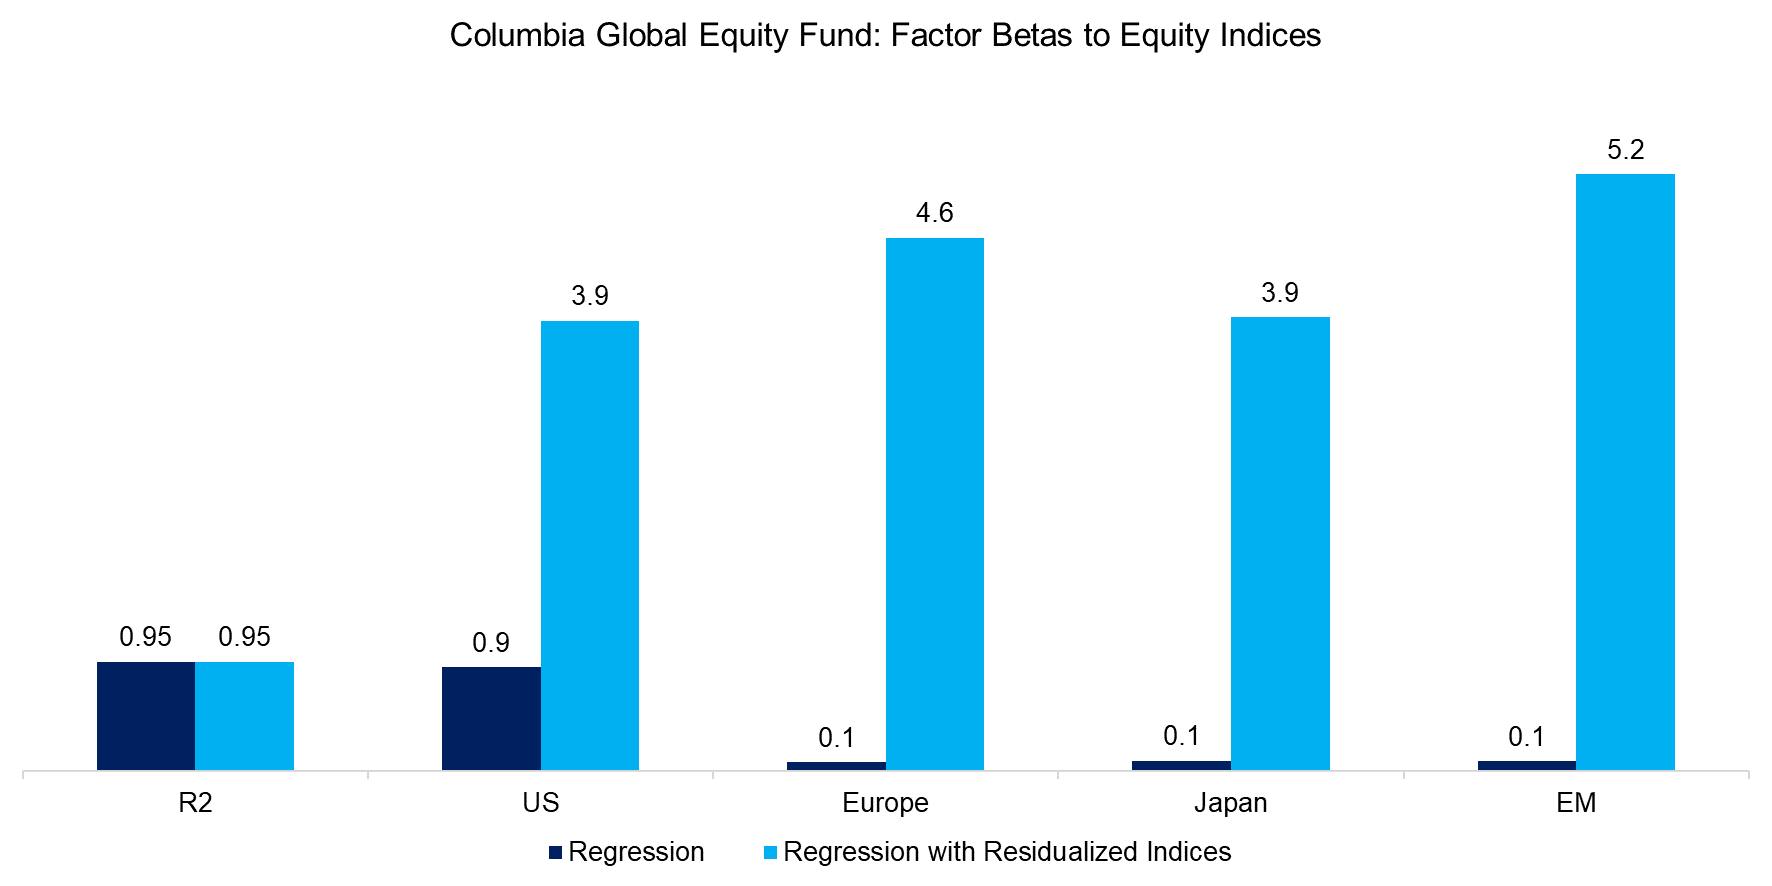 Columbia Global Equity Fund Factor Betas to Equity Indices